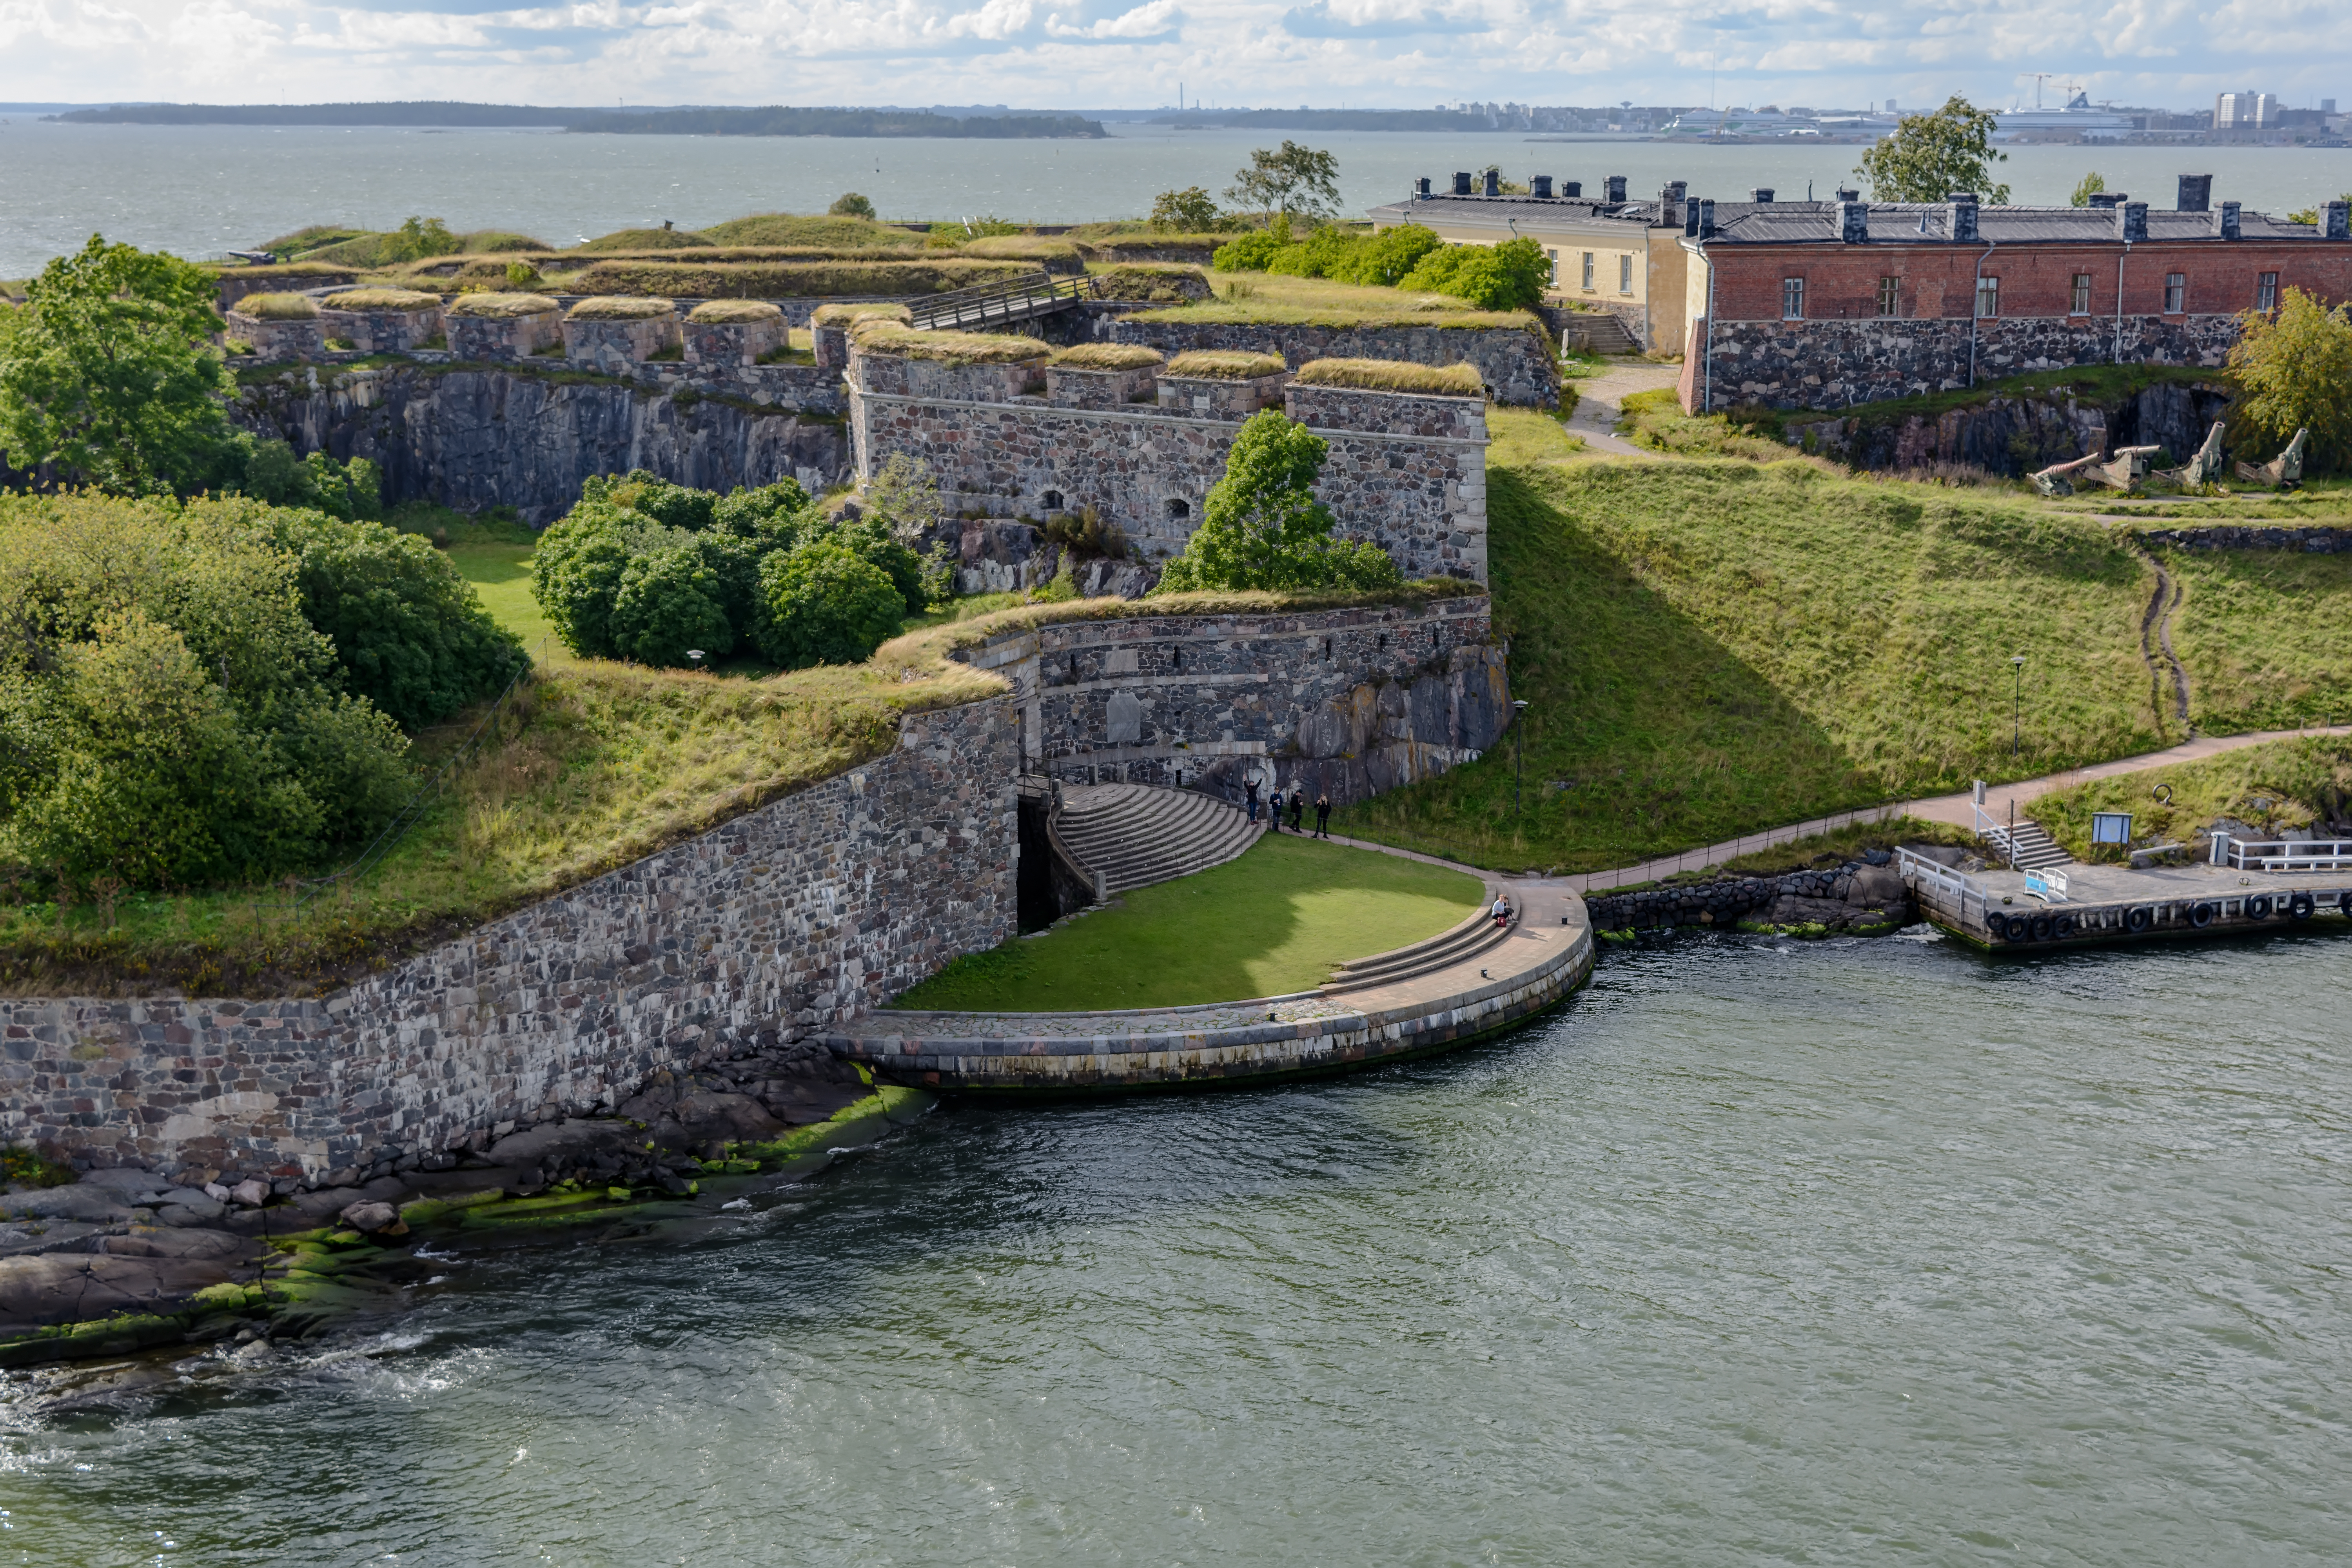 An aerial view of Suomenlinna fortress and the nature